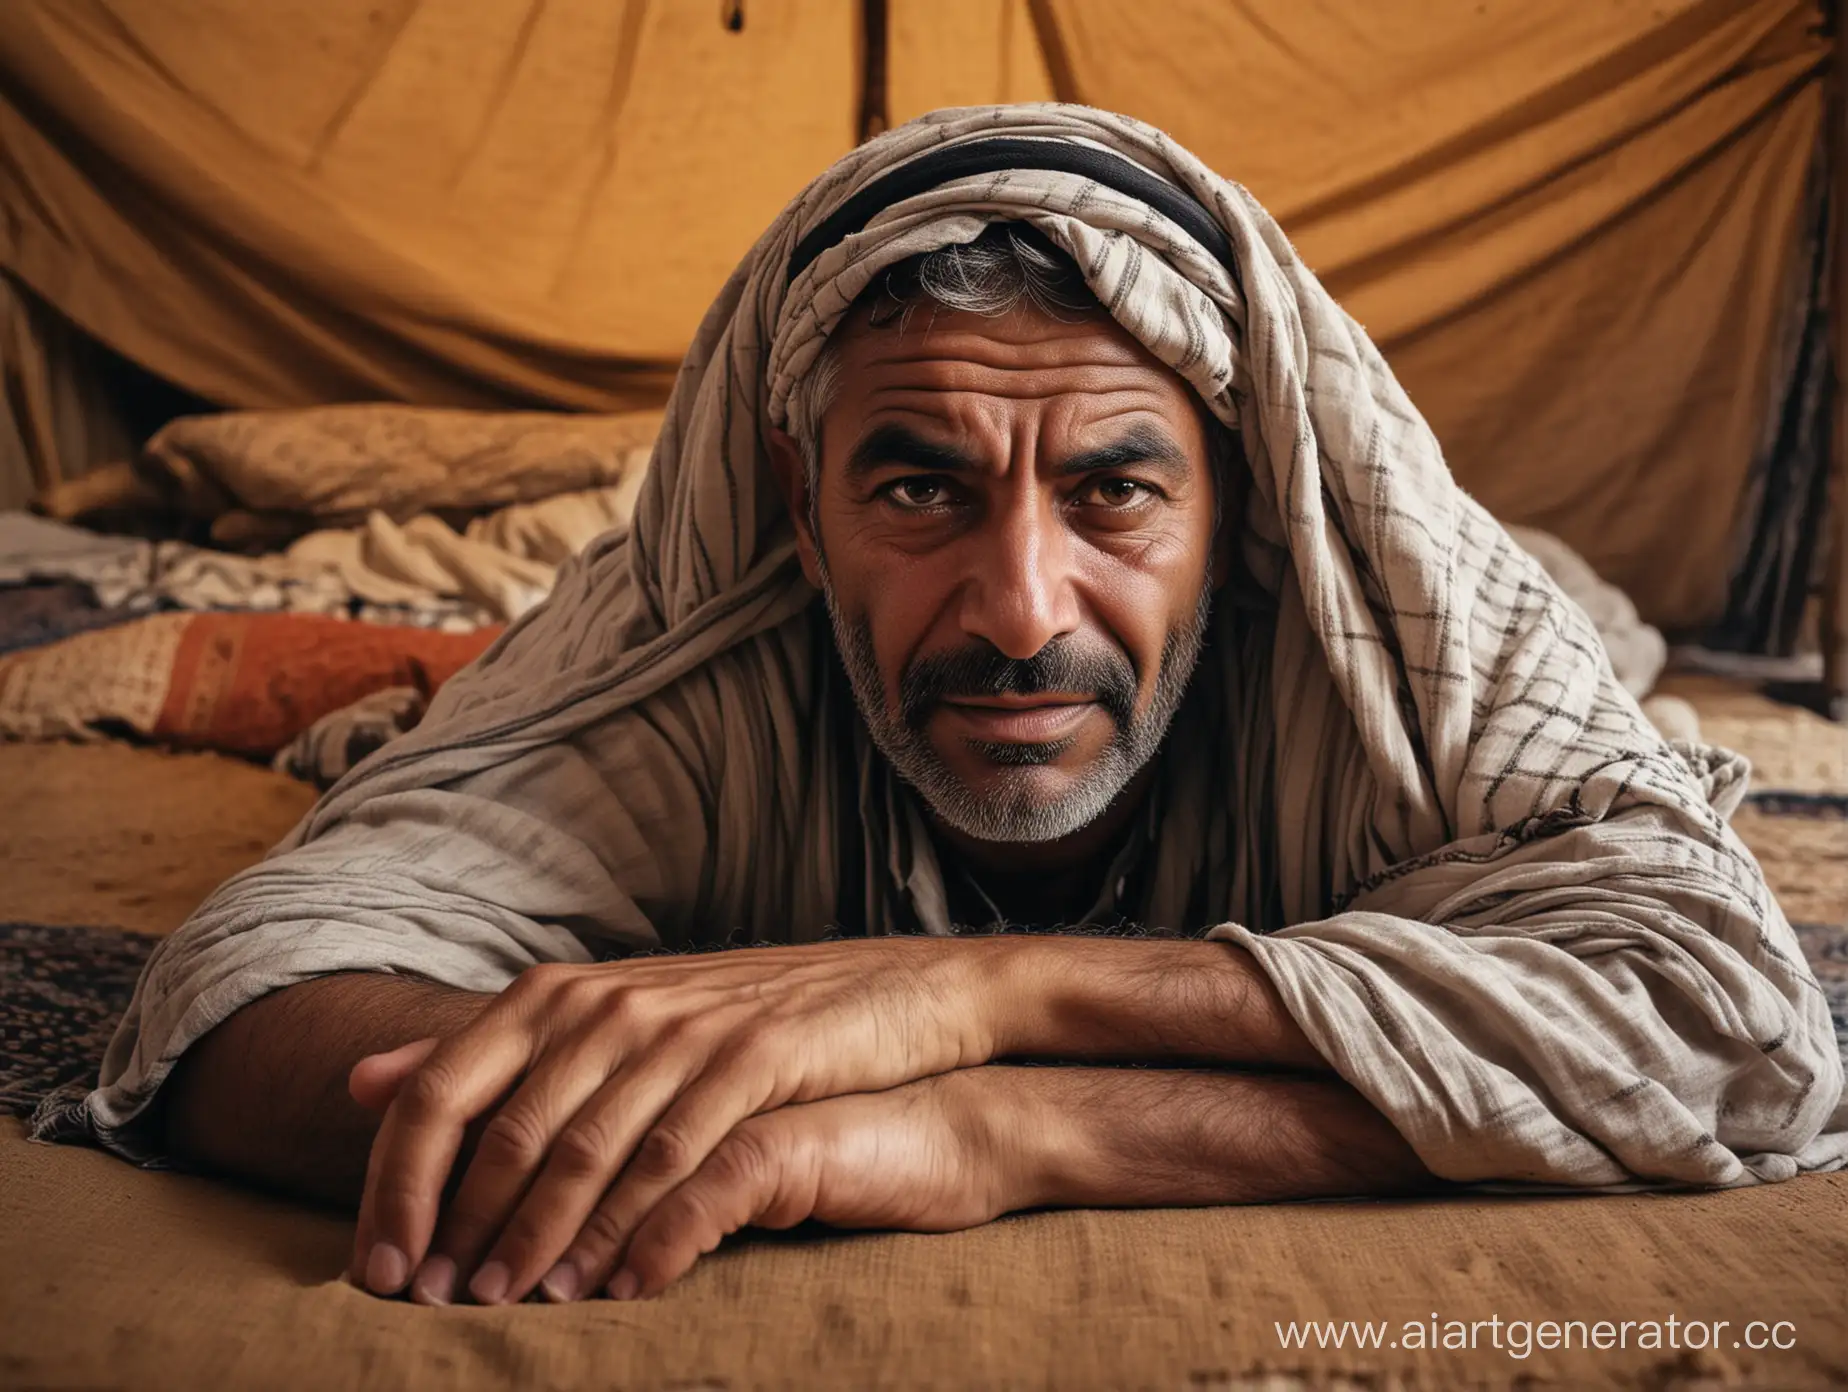   EVIL,50 YEAR OLD, LARGE, LEERING, GRIZZLED ARAB MAN, LAYING IN A BEDOUIN TENT WIDE